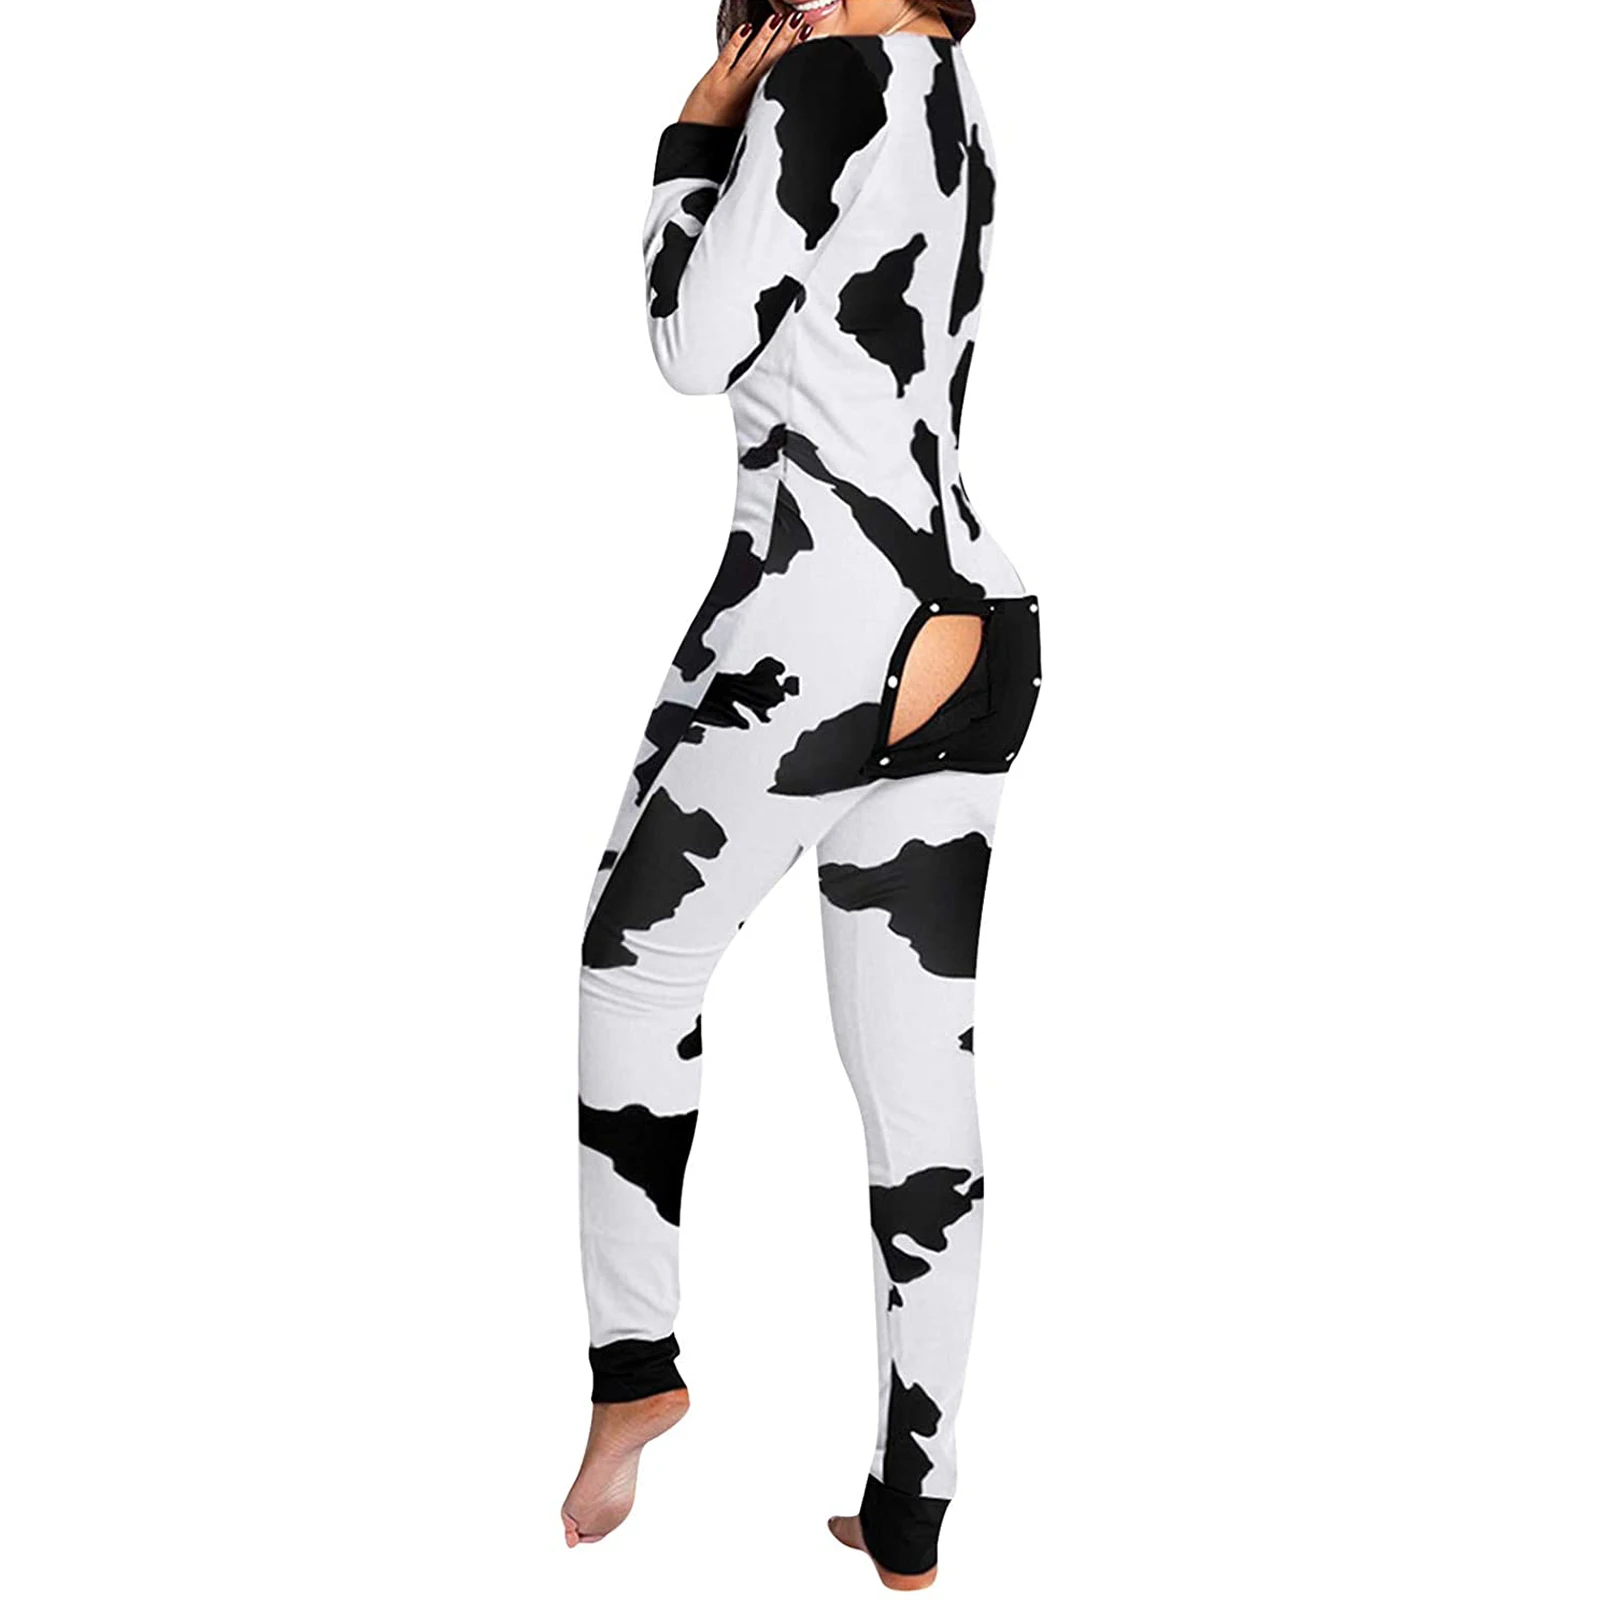 

Women Functional Buttoned Flap Jumpsuit Sleepwear, Solid Color / Printed Long Sleeve Homewear Pajamas 2021 New Fashion